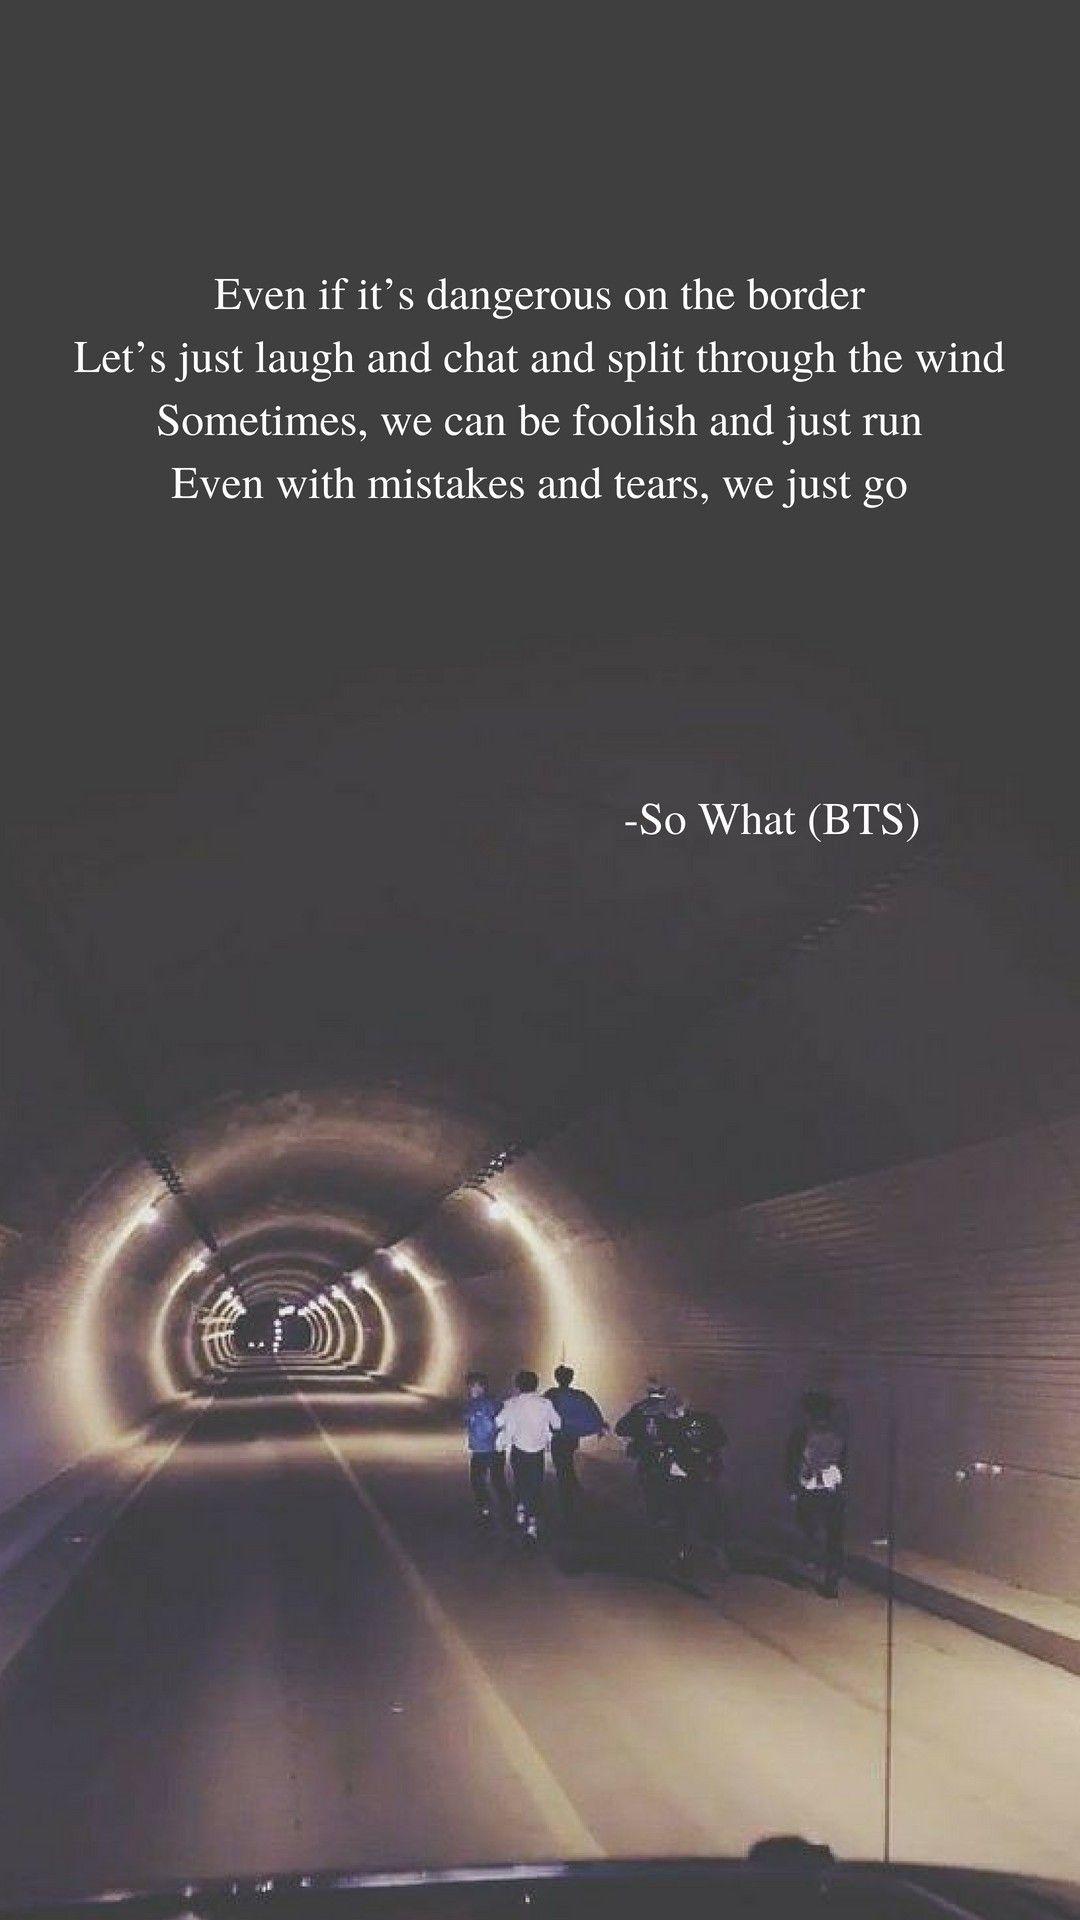 Collection of Bts Lyrics Wallpaper (image in Collection)